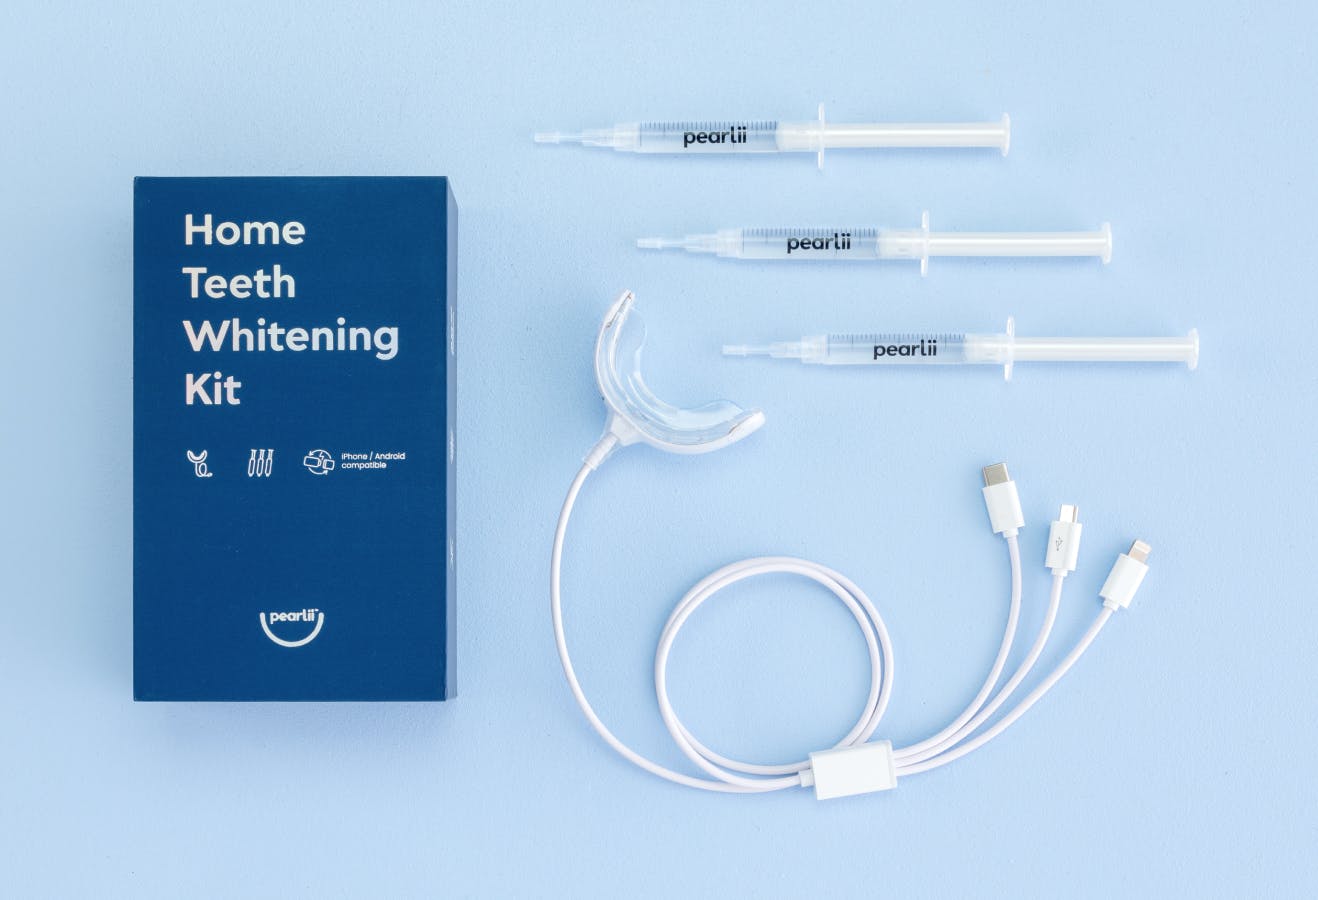 A Pearlii Home Teeth Whitening Kit